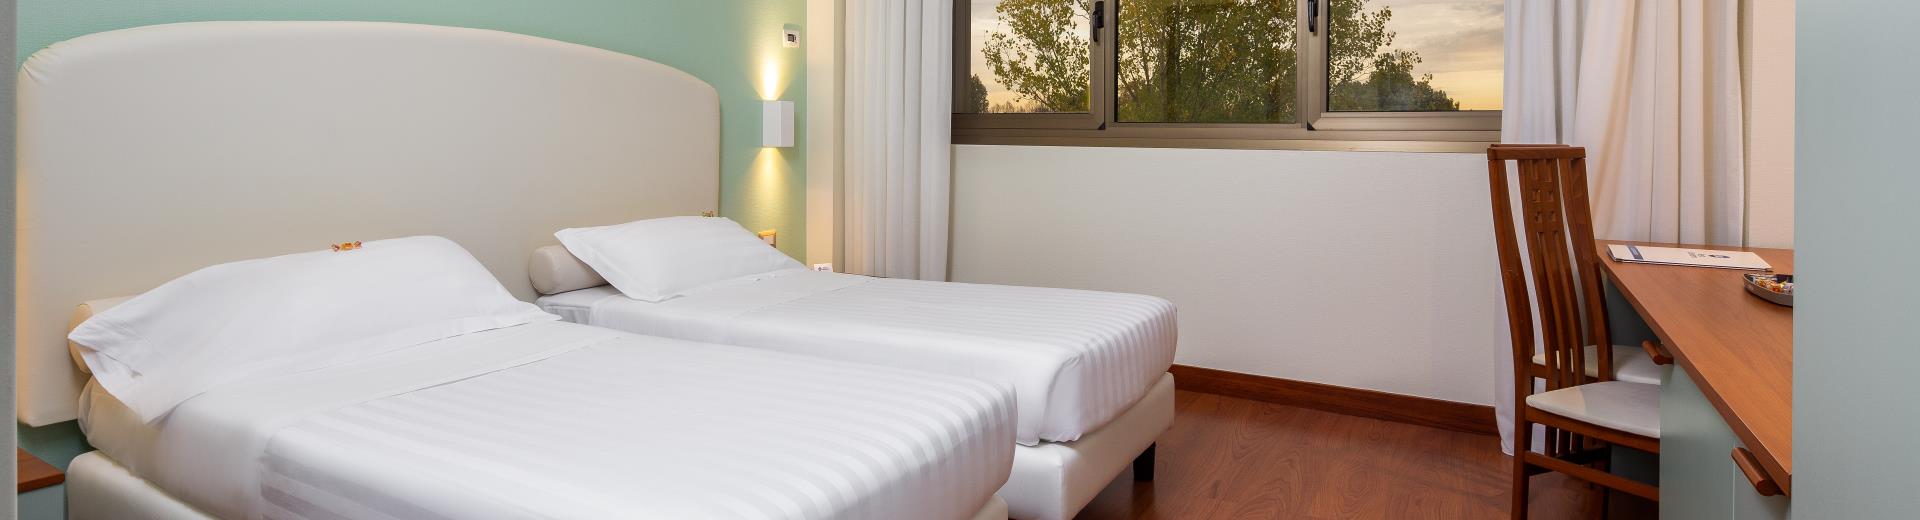 Enjoy the comfort of the rooms at BW Air Hotel Linate, our 4-star hotel very close to the airport!